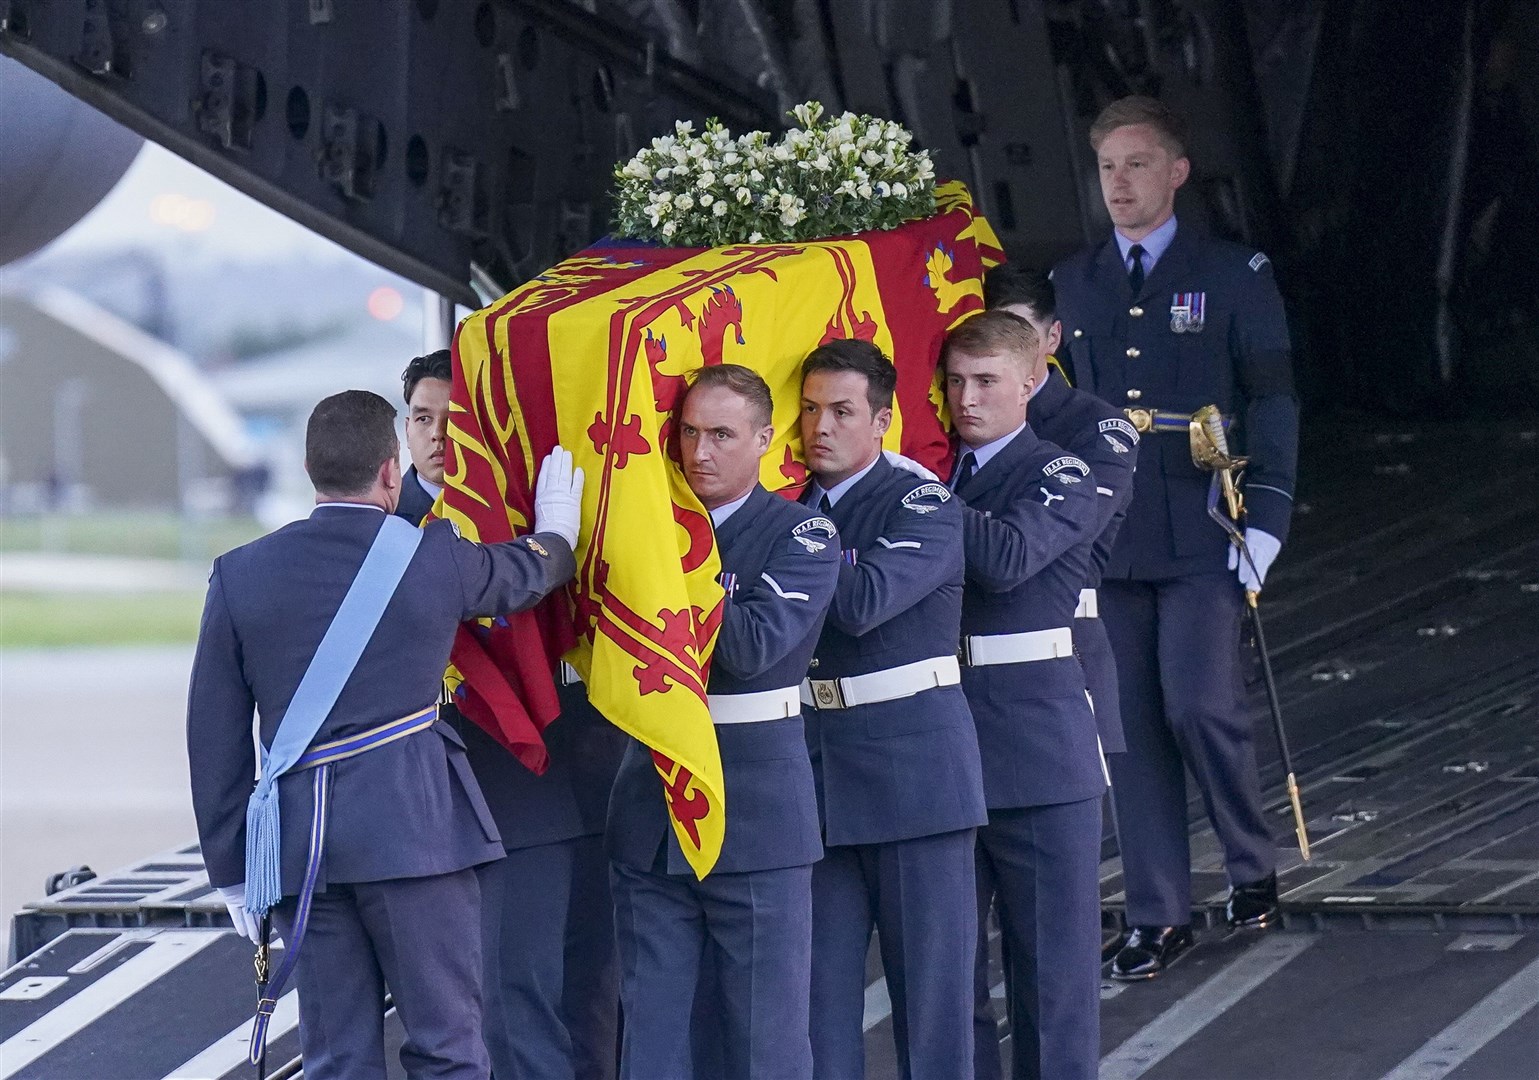 The bearer party from the Queen’s Colour Squadron carry the Queen’s coffin to the state hearse (Arthur Edwards/The Sun)